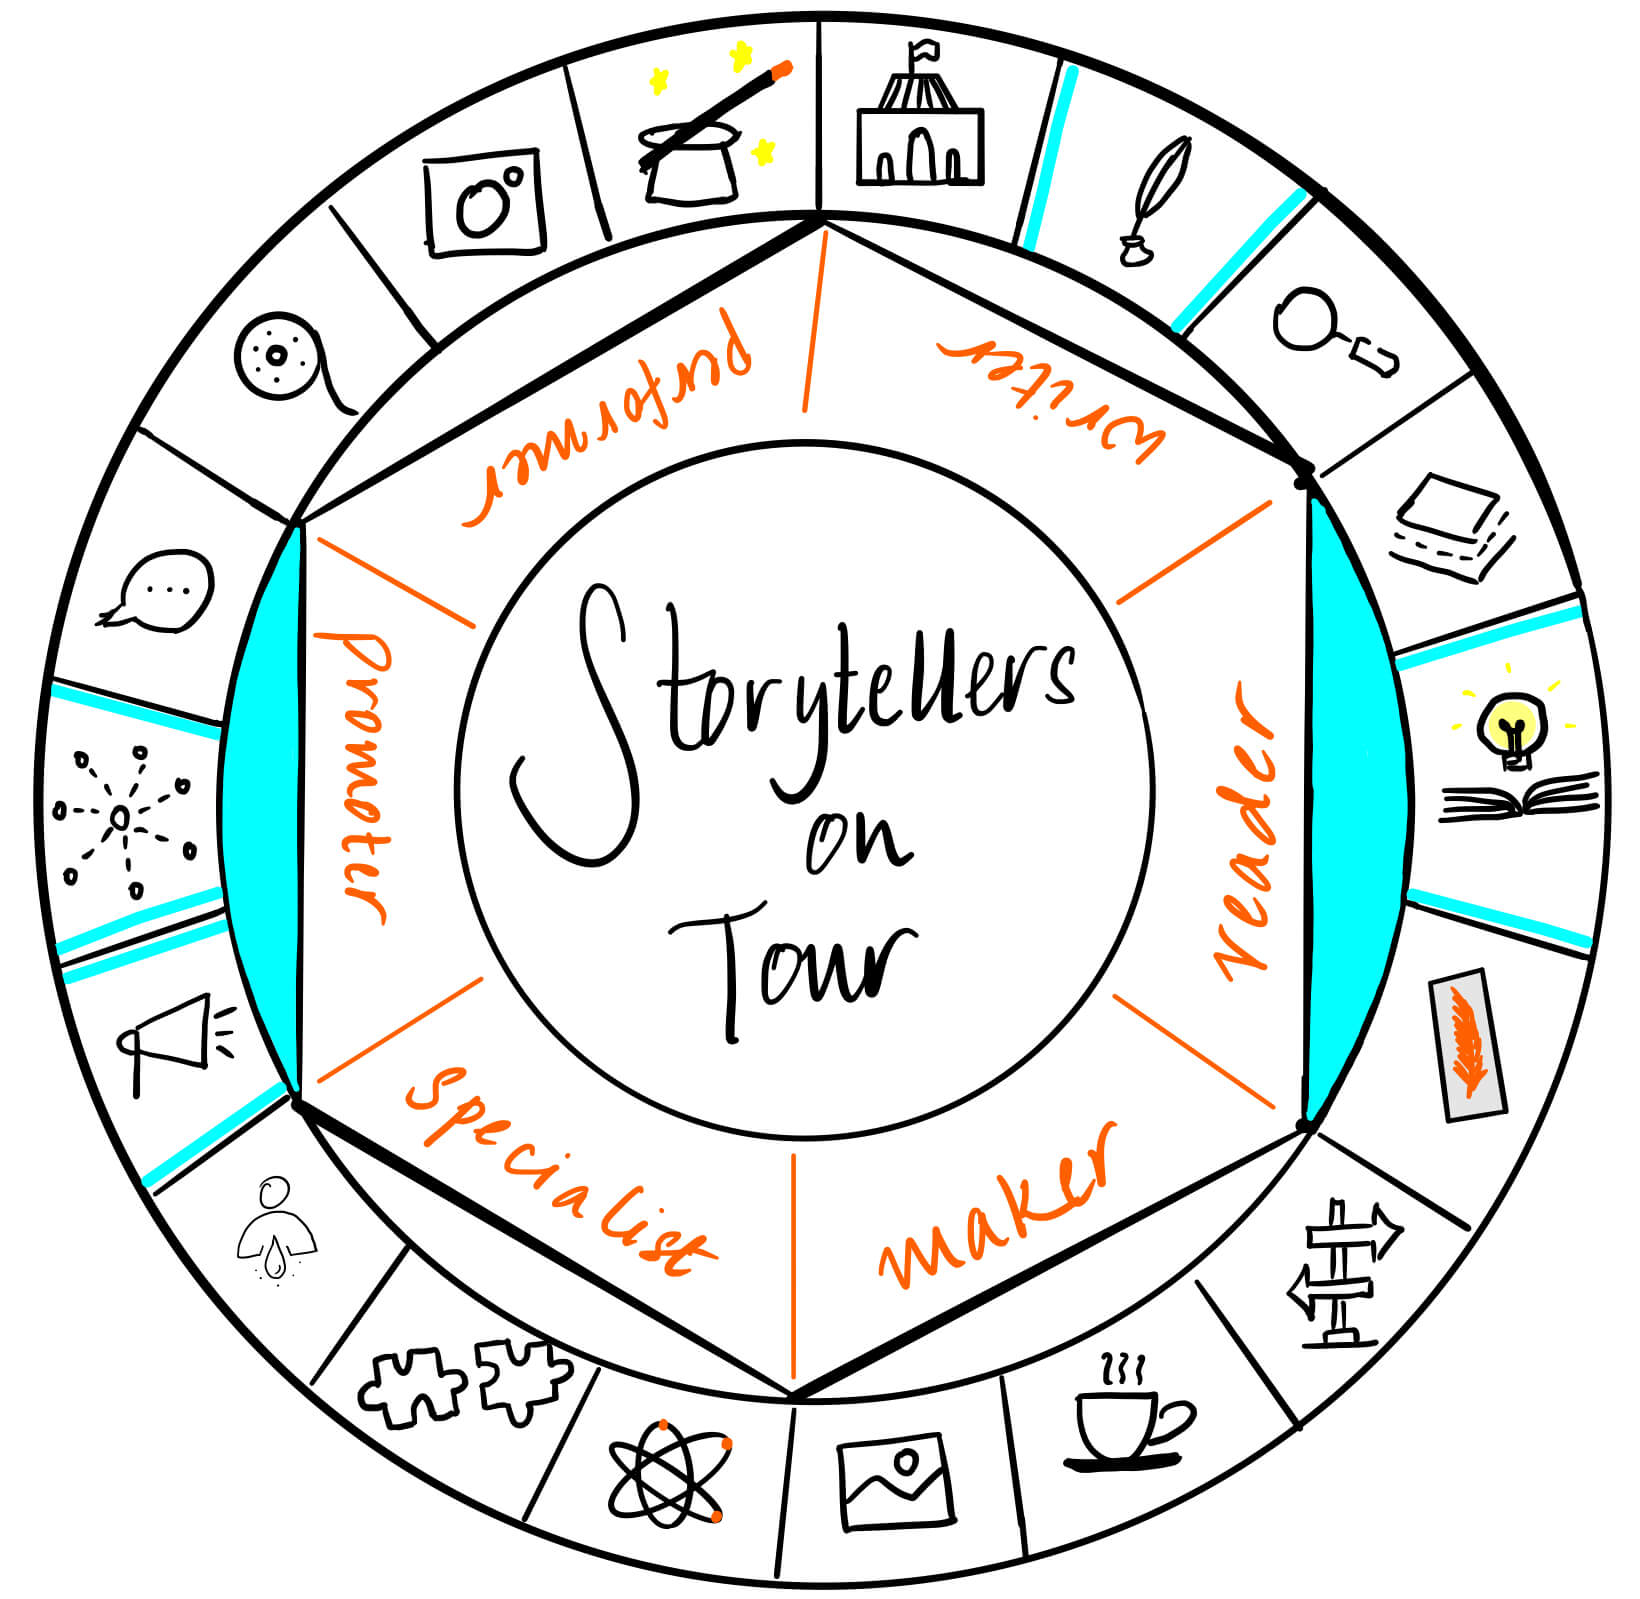 Storytellers on Tour are readers and promoters. It's a pleasure to have Timy and Justine over on The Creator's Roulette to talk about organizing blog tours.